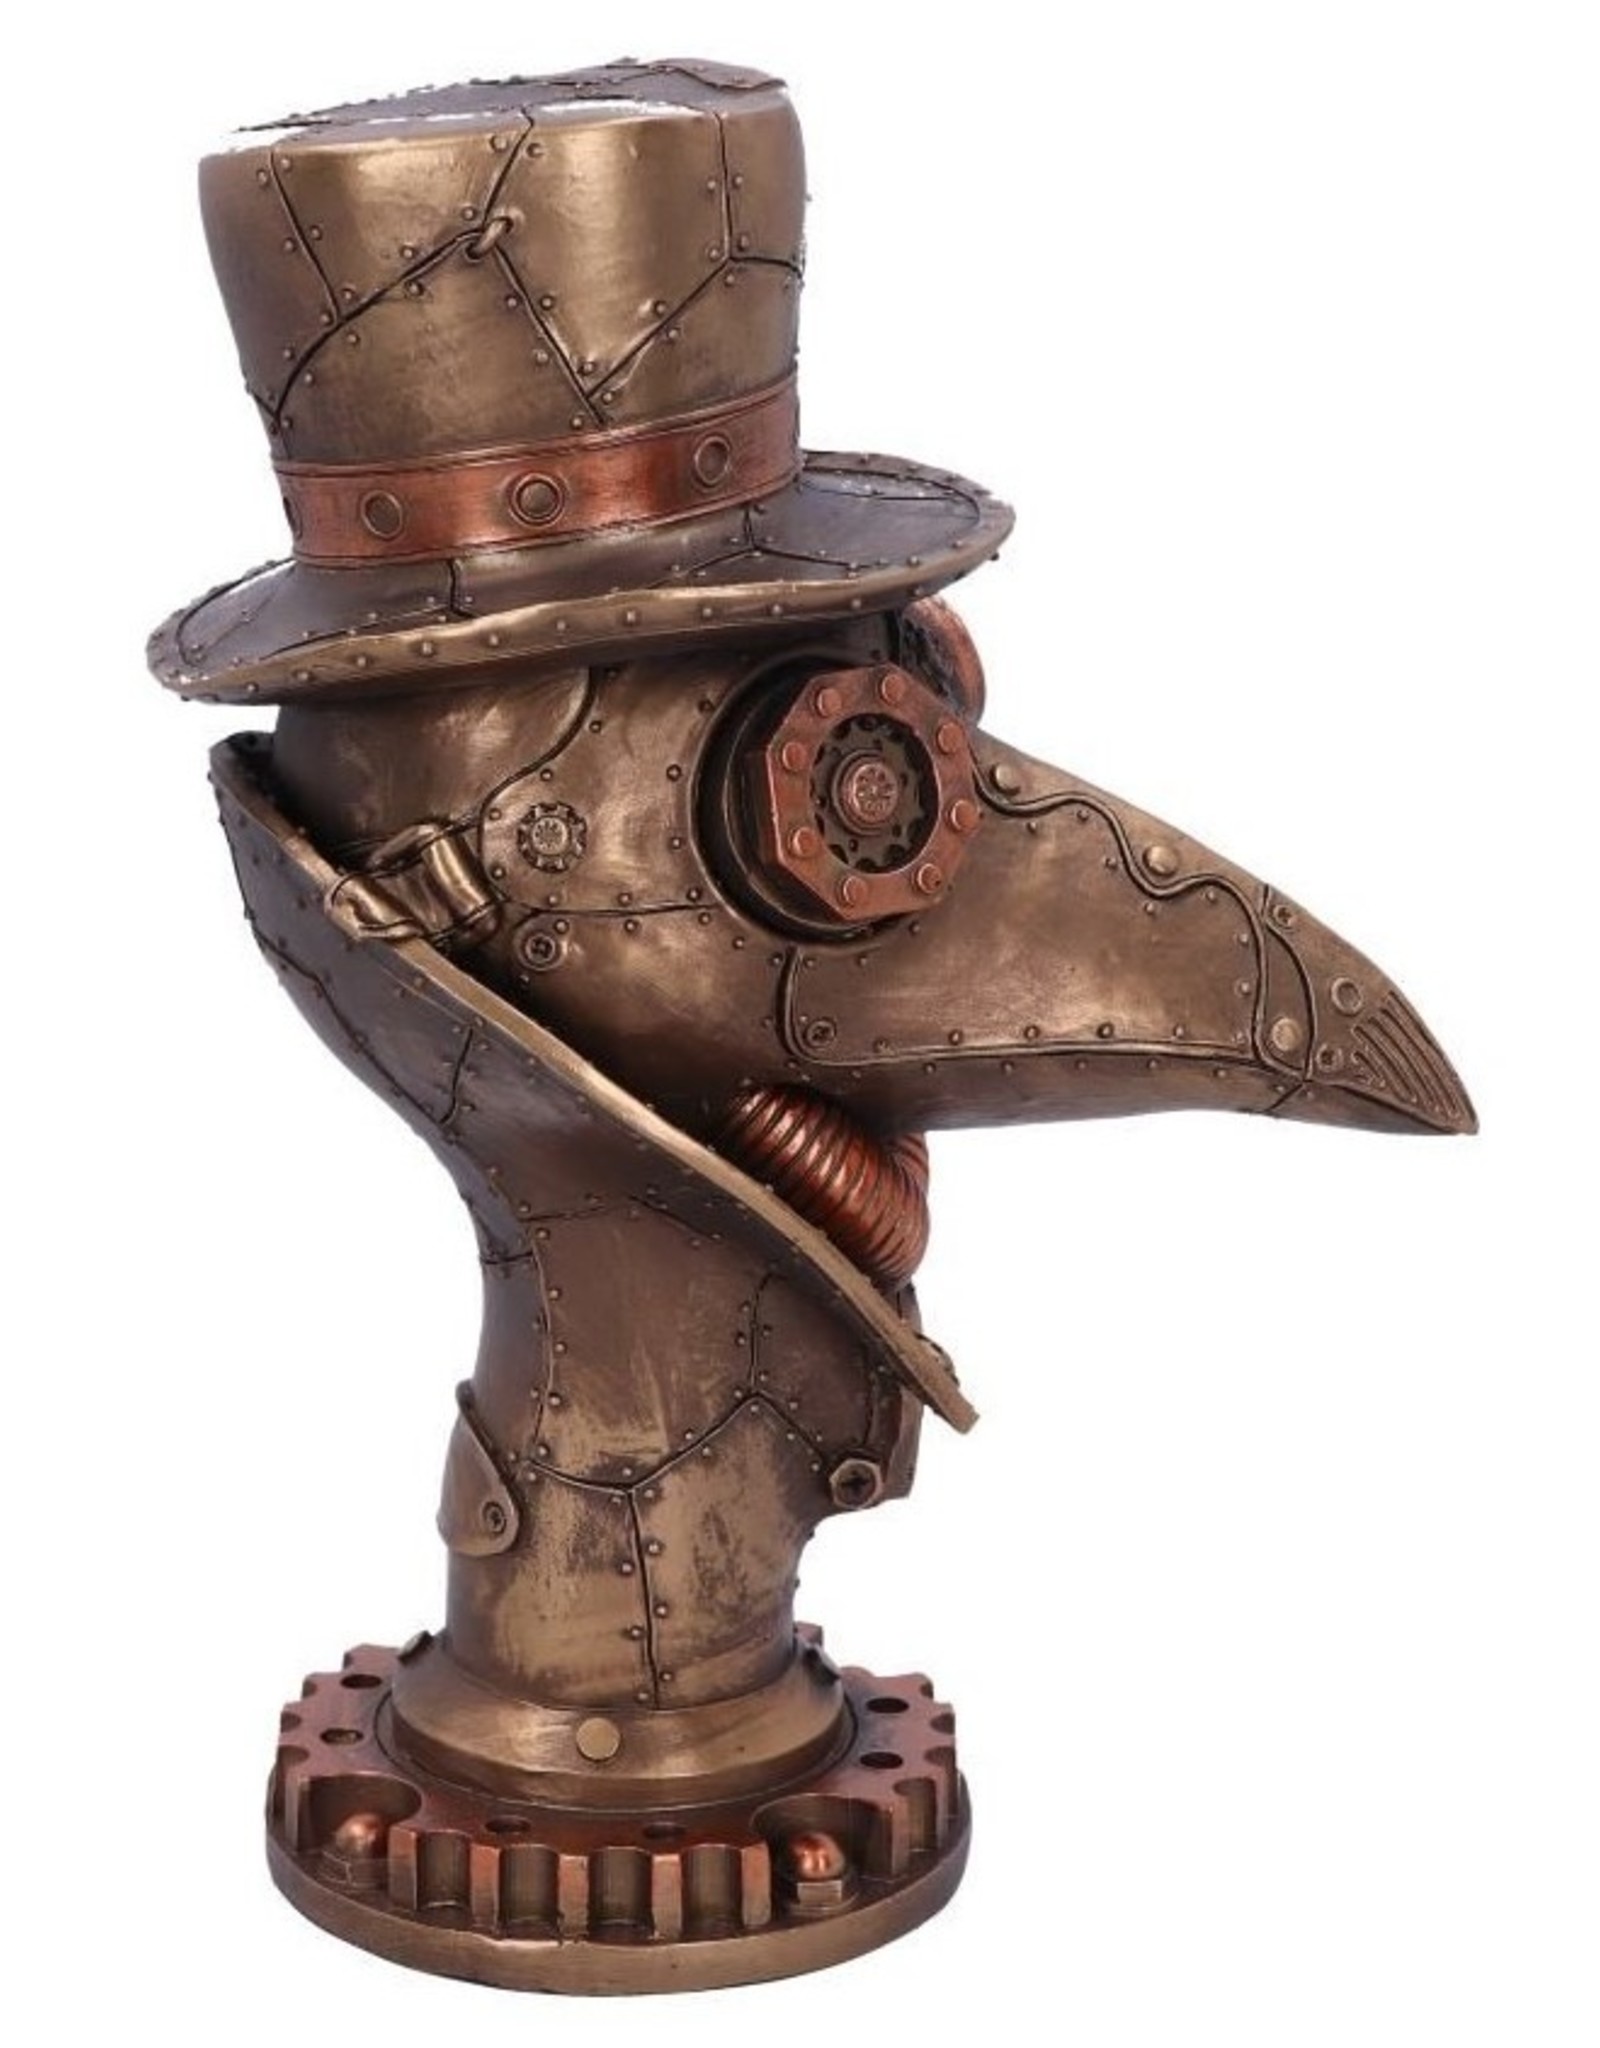 NemesisNow Giftware Figurines Collectables - Steampunk figurine Plague Doctor Beaky